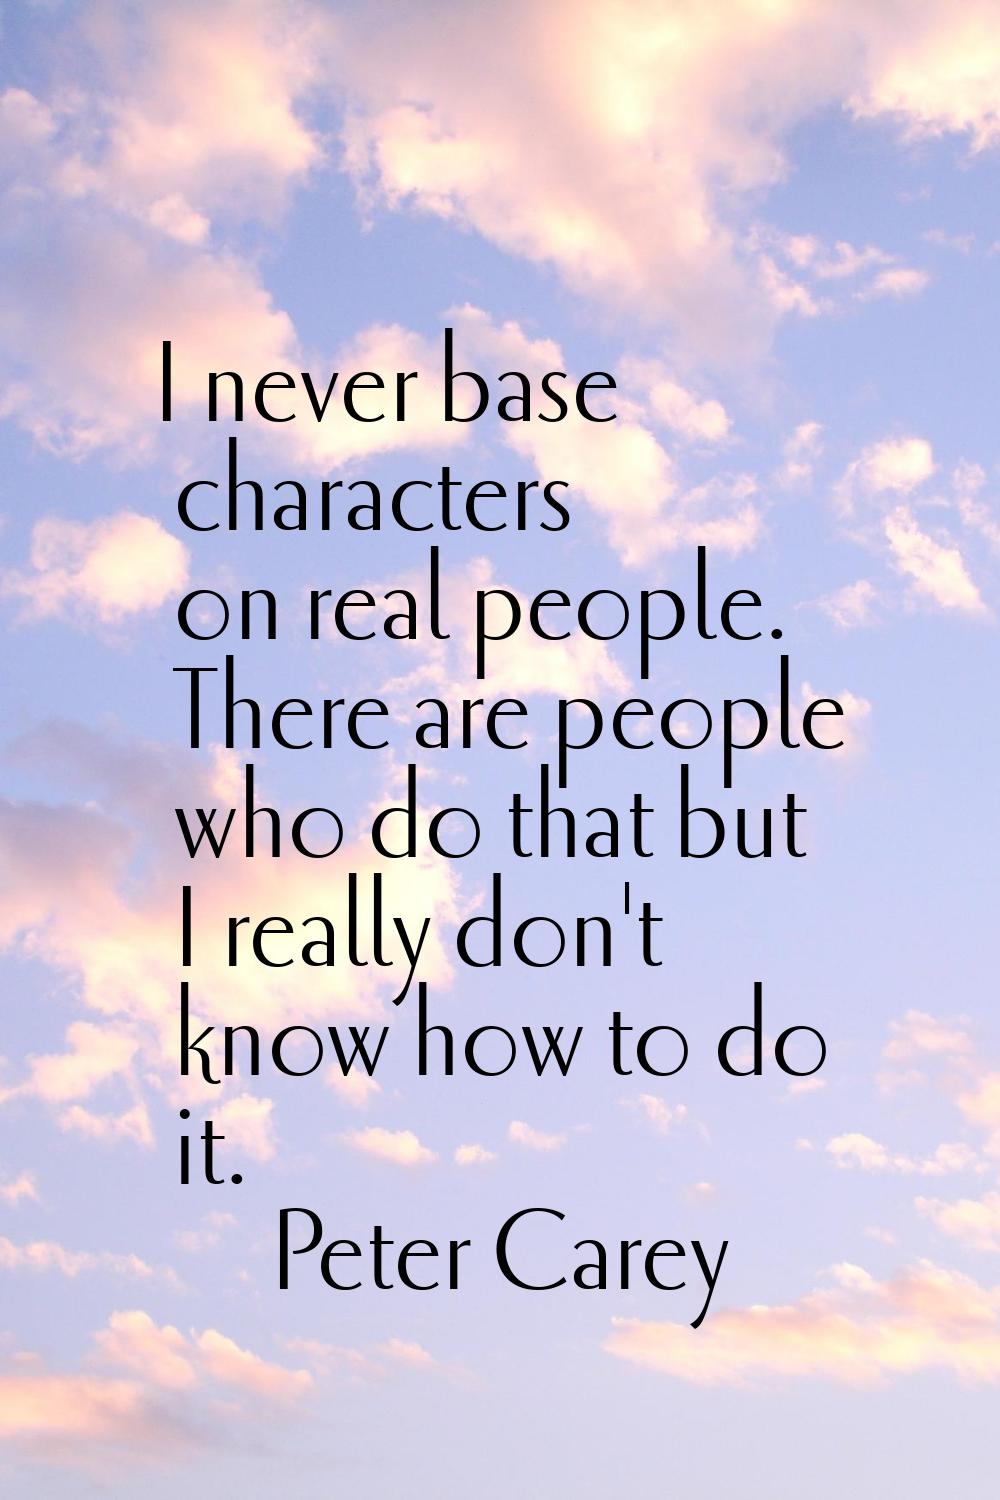 I never base characters on real people. There are people who do that but I really don't know how to